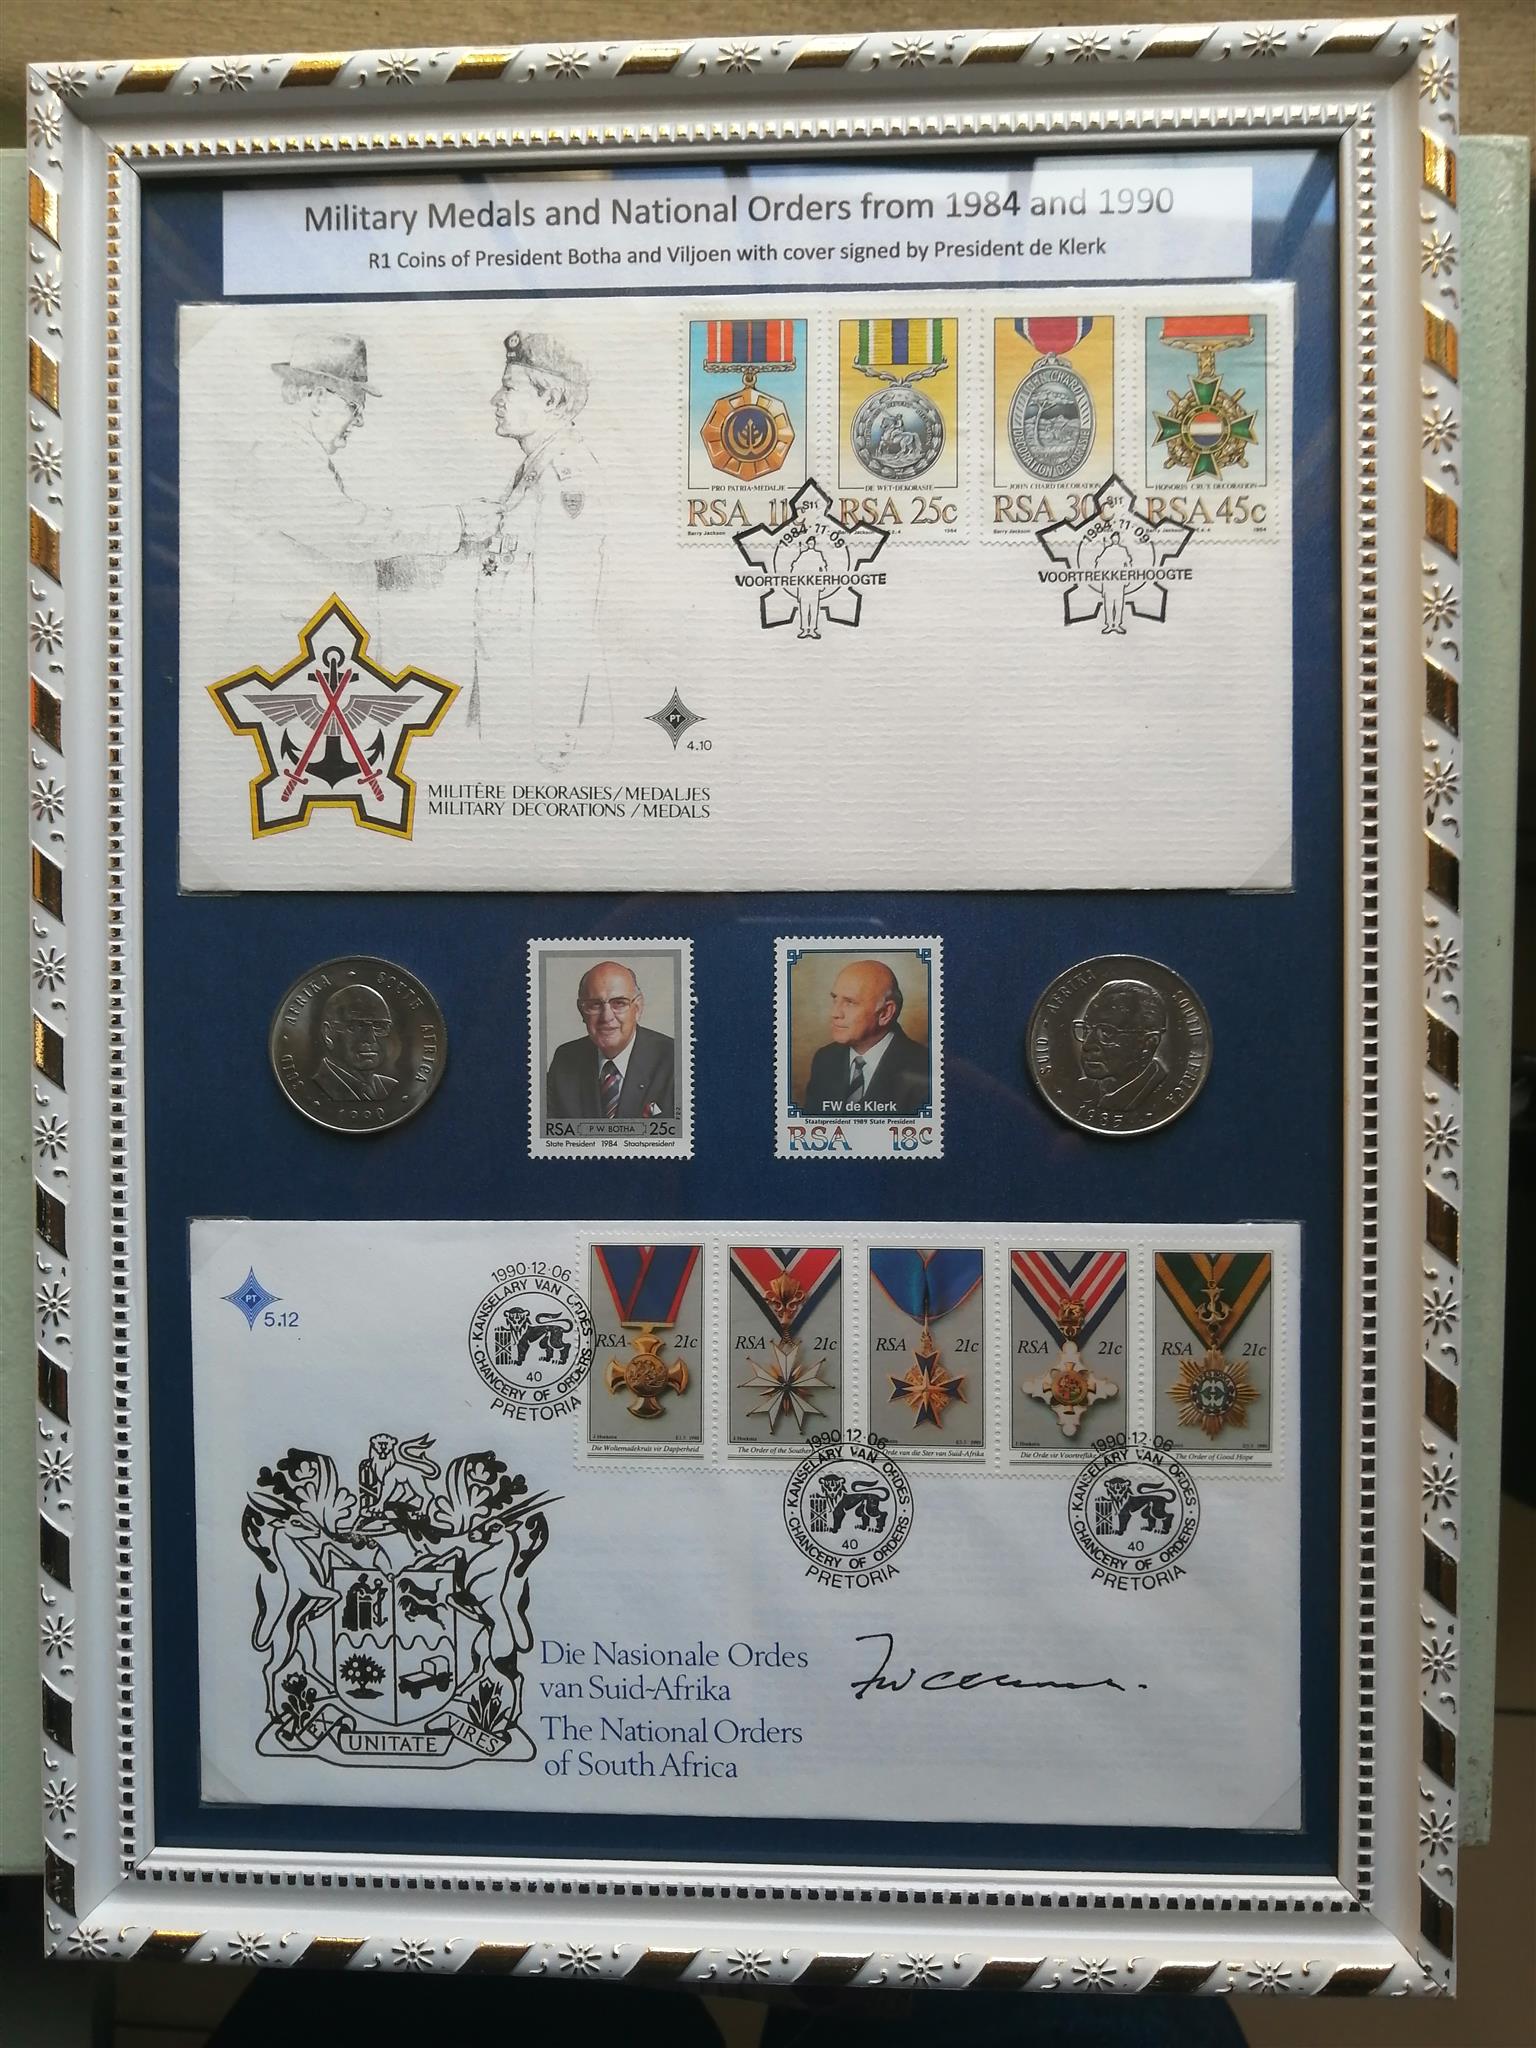 Military decorations First day Covers set - signed by FW de Klerk